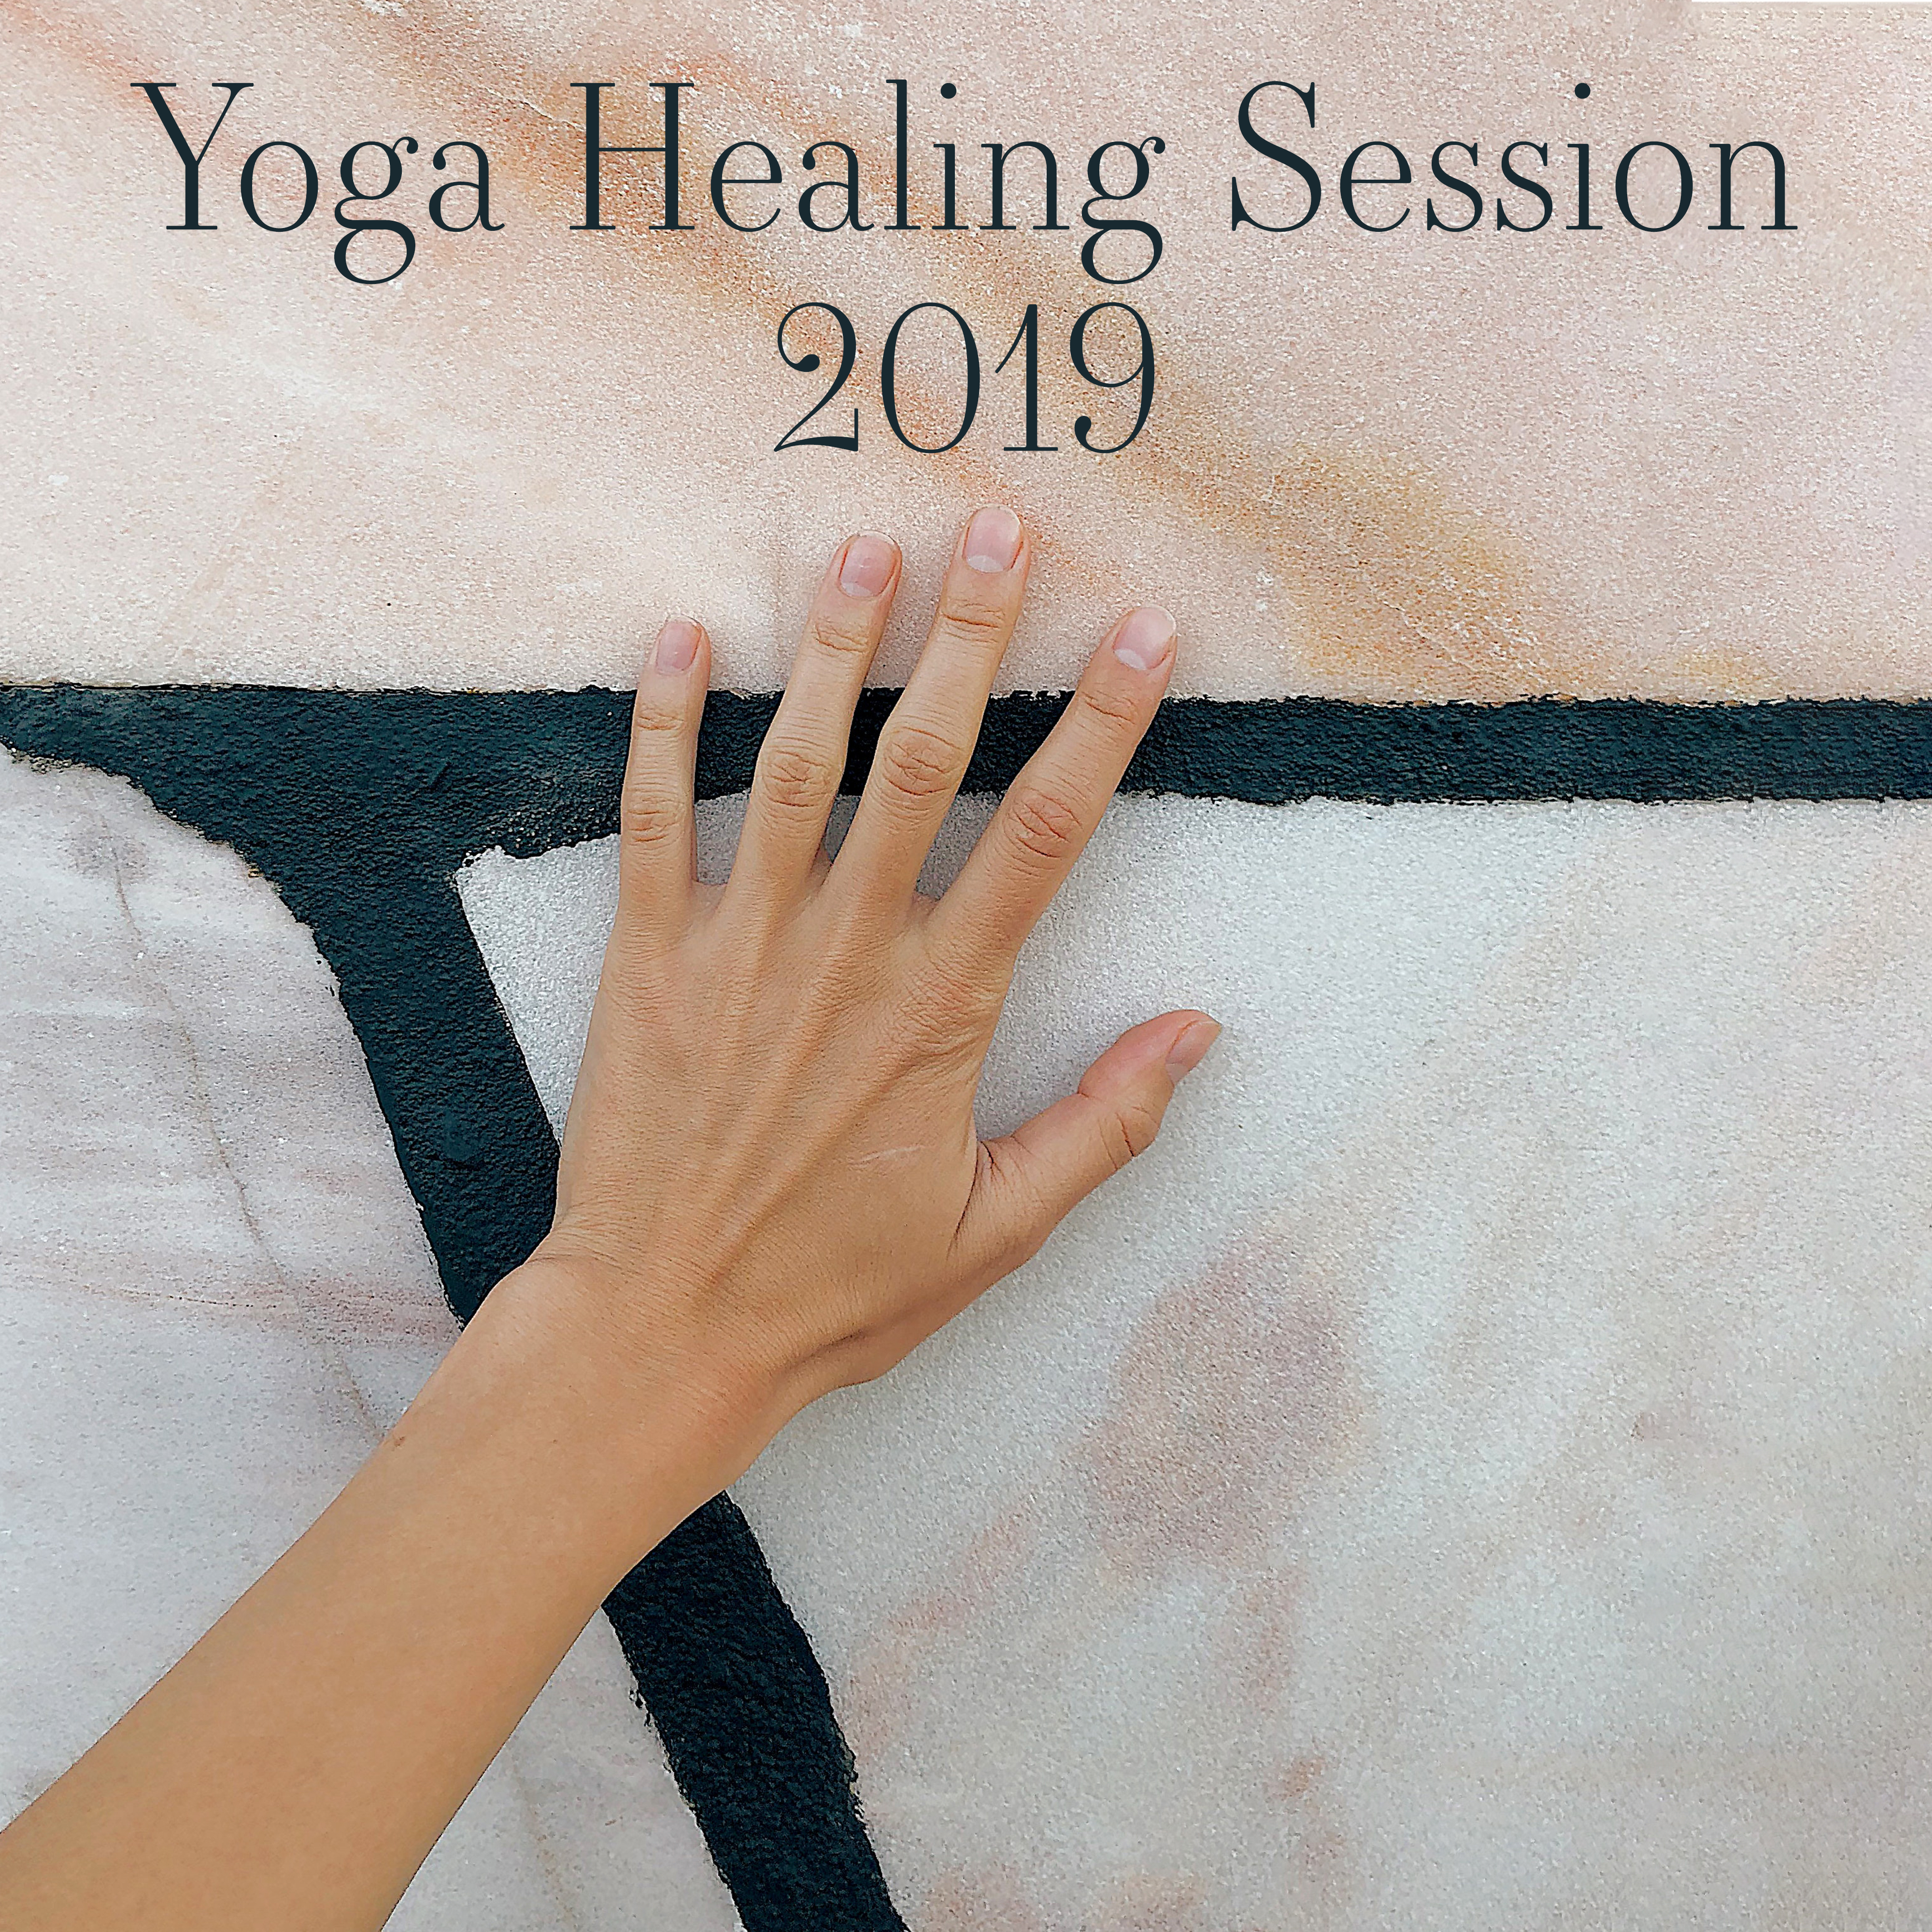 Yoga Healing Session 2019 – Meditation & Relaxation New Age Music